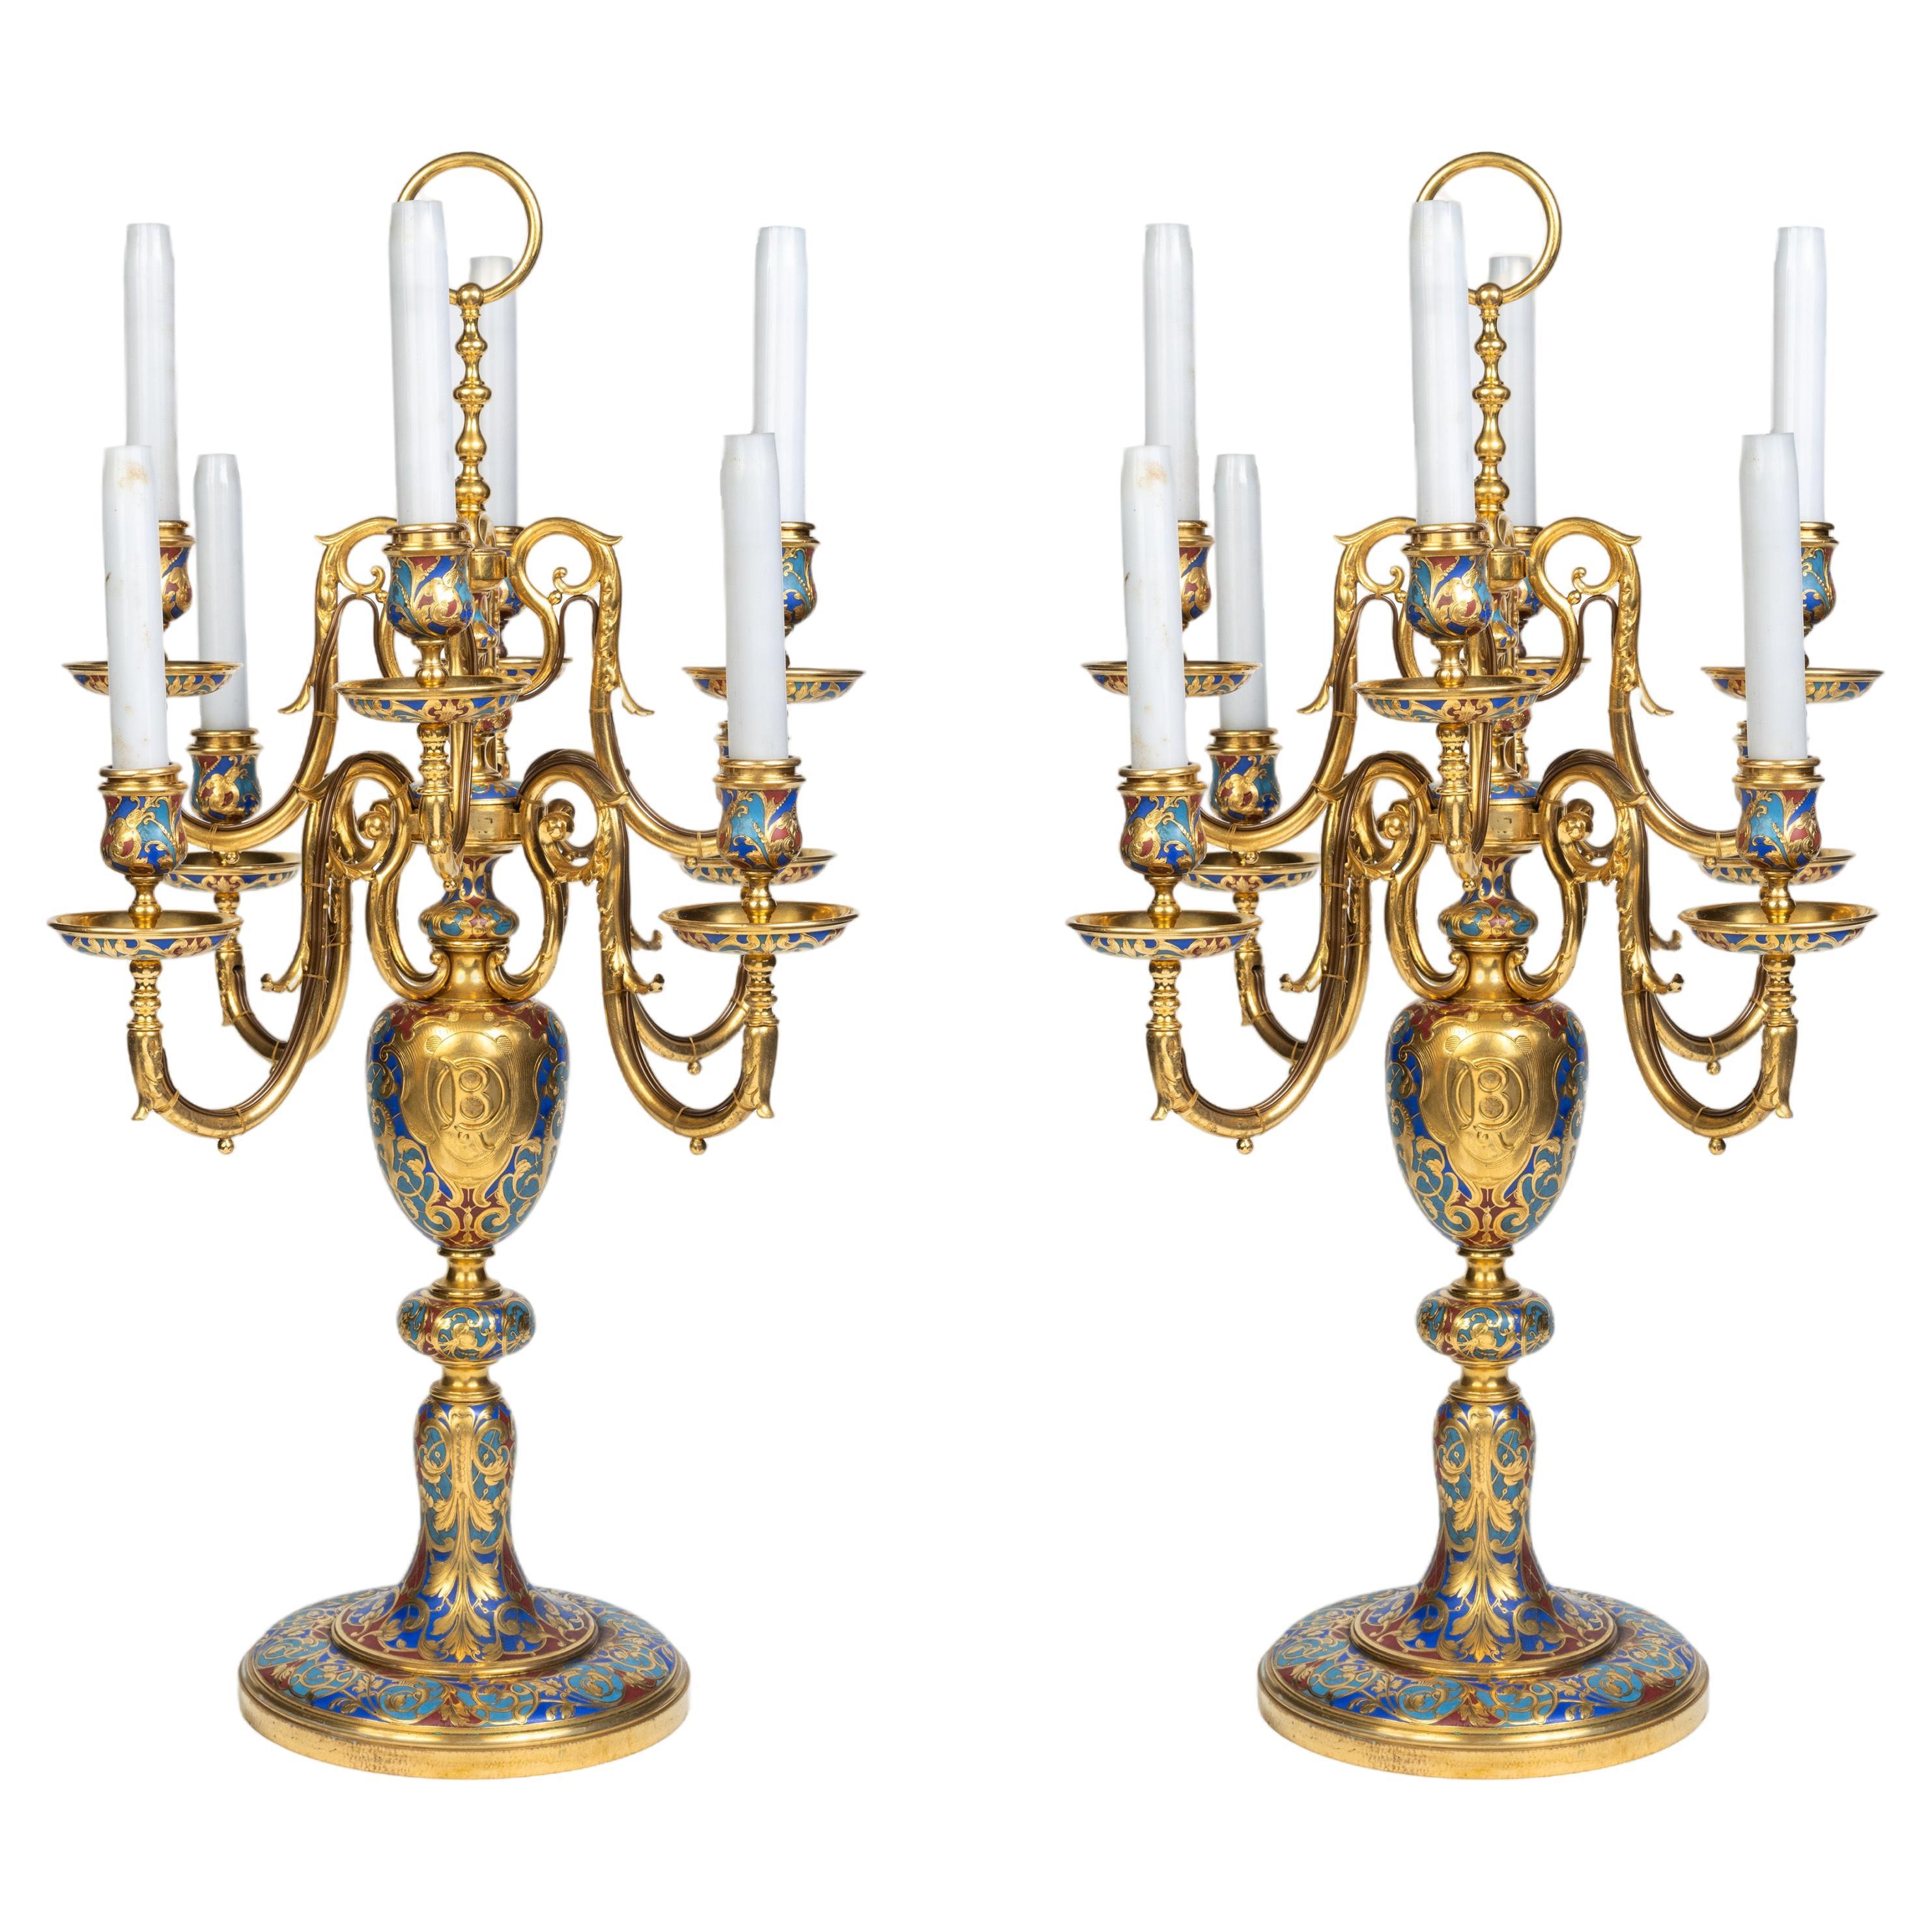 An Exceptional Pair of Champleve Enamel Ormolu Candelabra by Sevin & Barbedienne For Sale